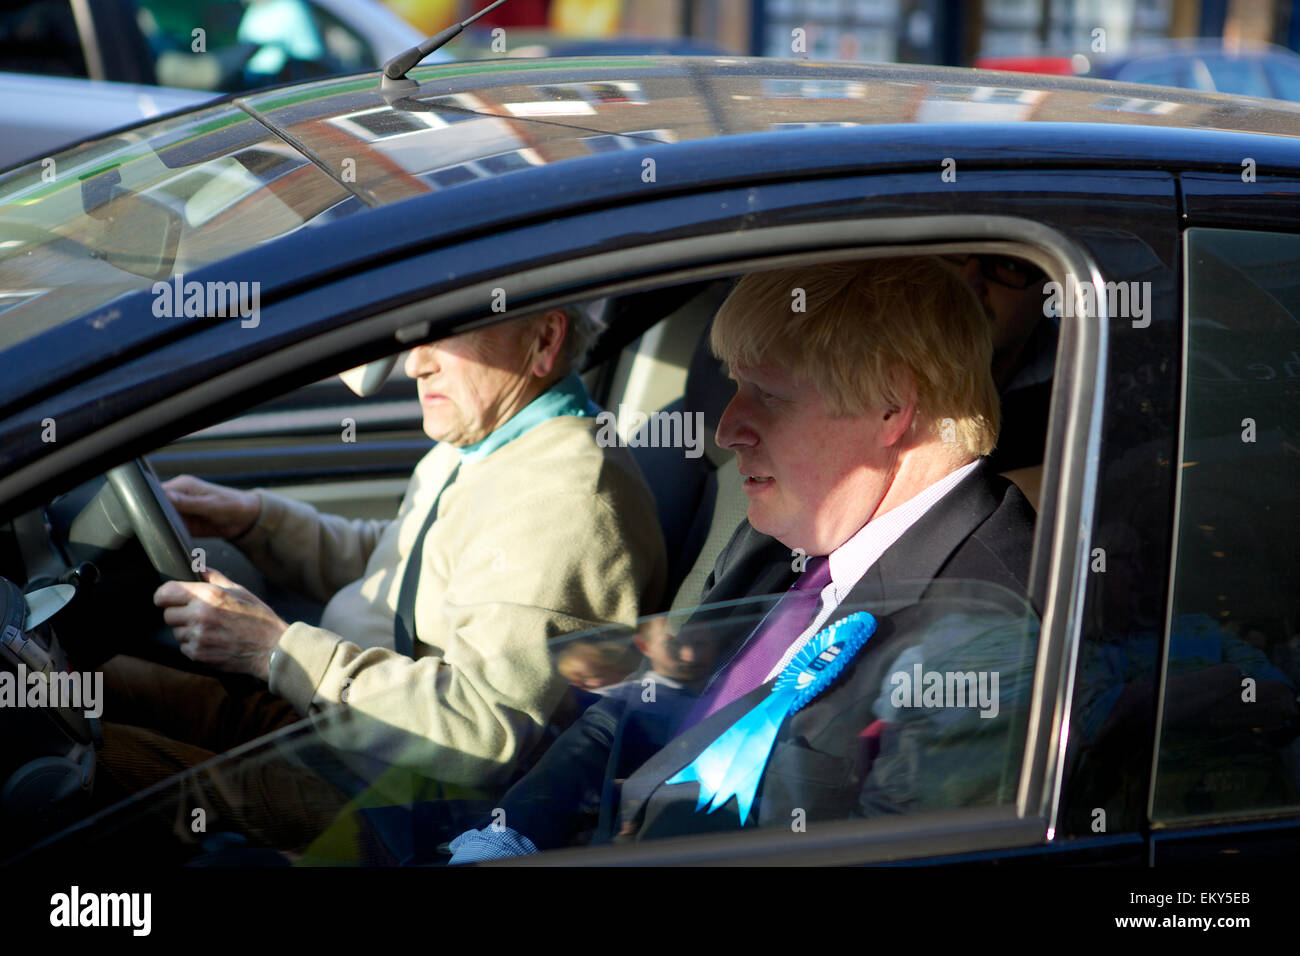 Teddington, Middlesex, United Kingdom. 14 April 2015.  Boris Johnson - the Mayor of London - visits Teddington as part of the Conservatives election campaigning.  He toured around independent shops in the High Street meeting local people, accompanied by Dr Tania Mathias the Conservative parliamentary candidate for Twickenham and also Zac Goldsmith the Conservative MP for Richmond Park. Credit:  Emma Durnford/Alamy Live News Stock Photo